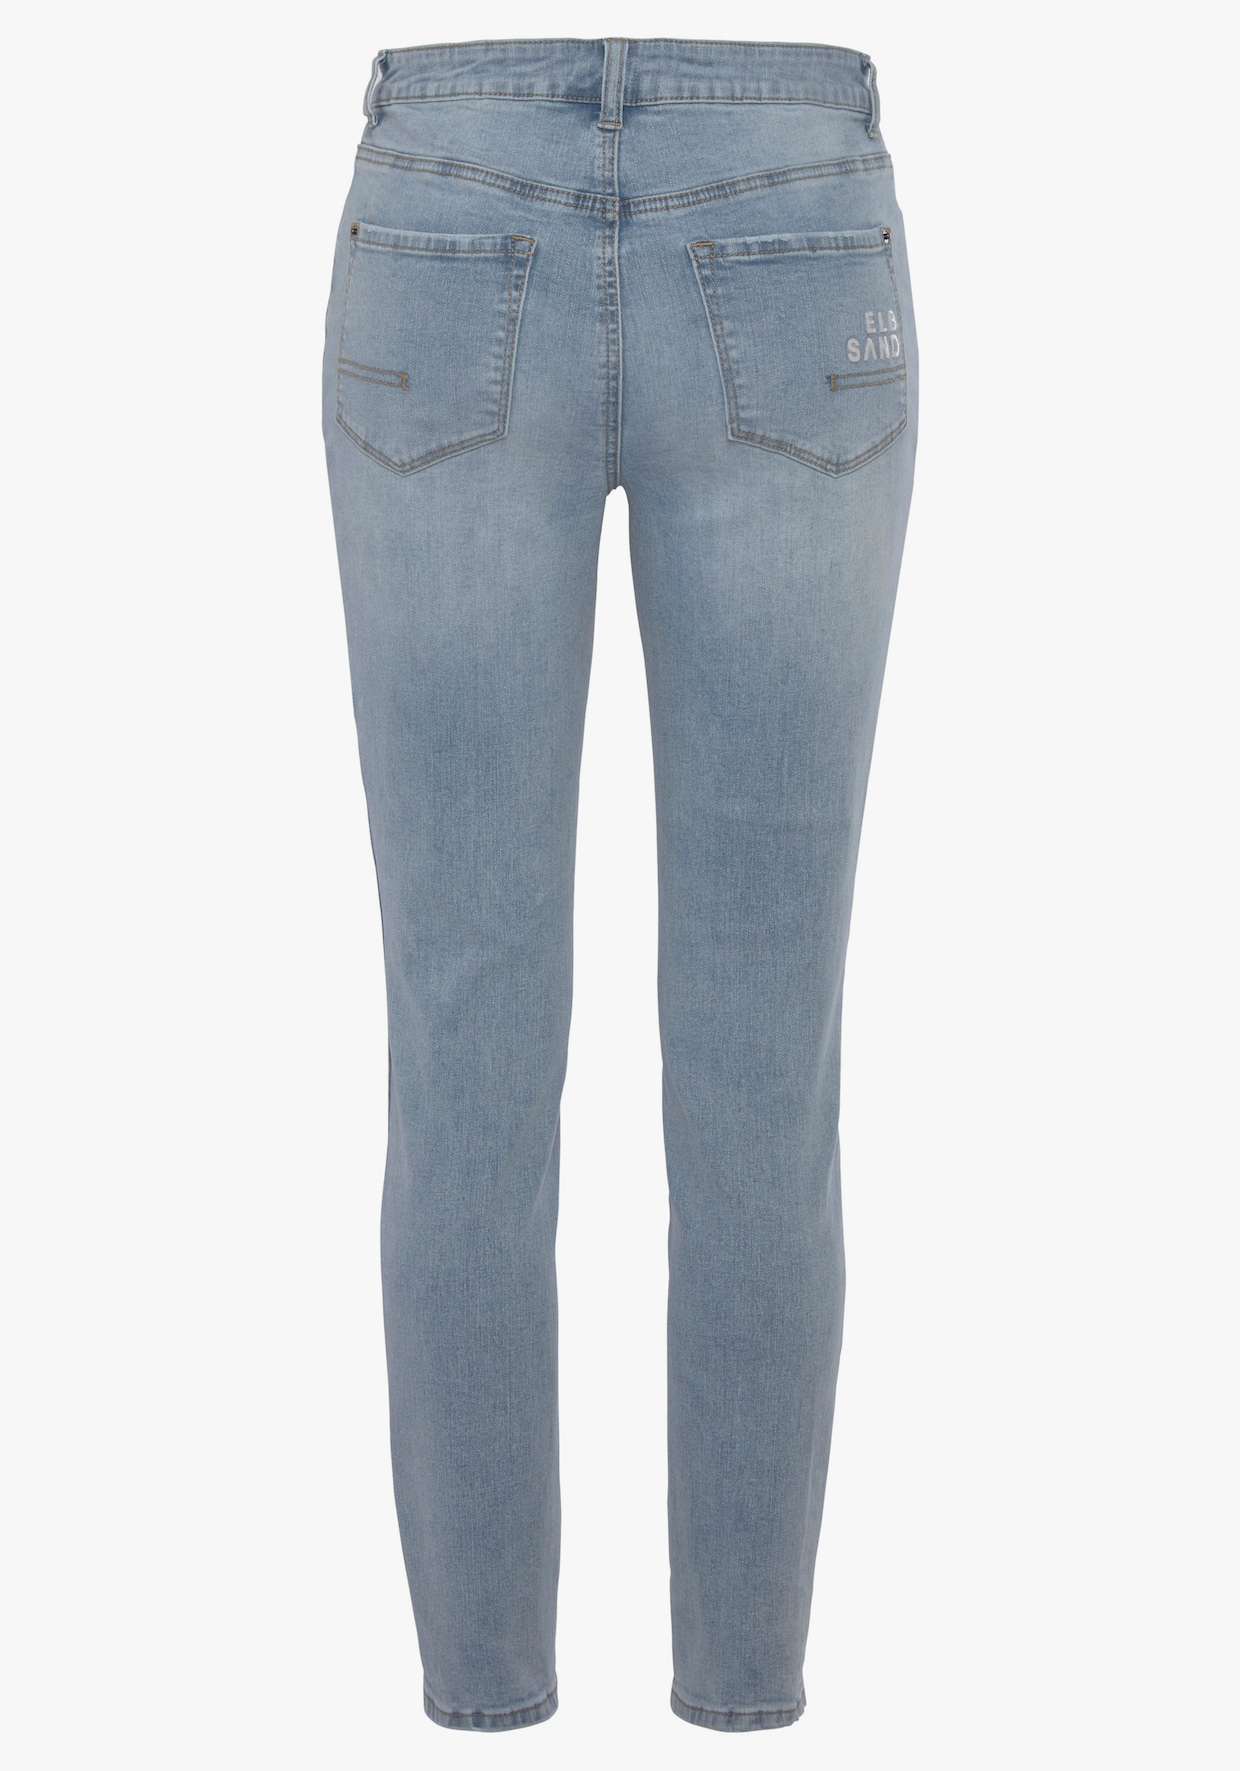 Elbsand Slim fit jeans - blue washed